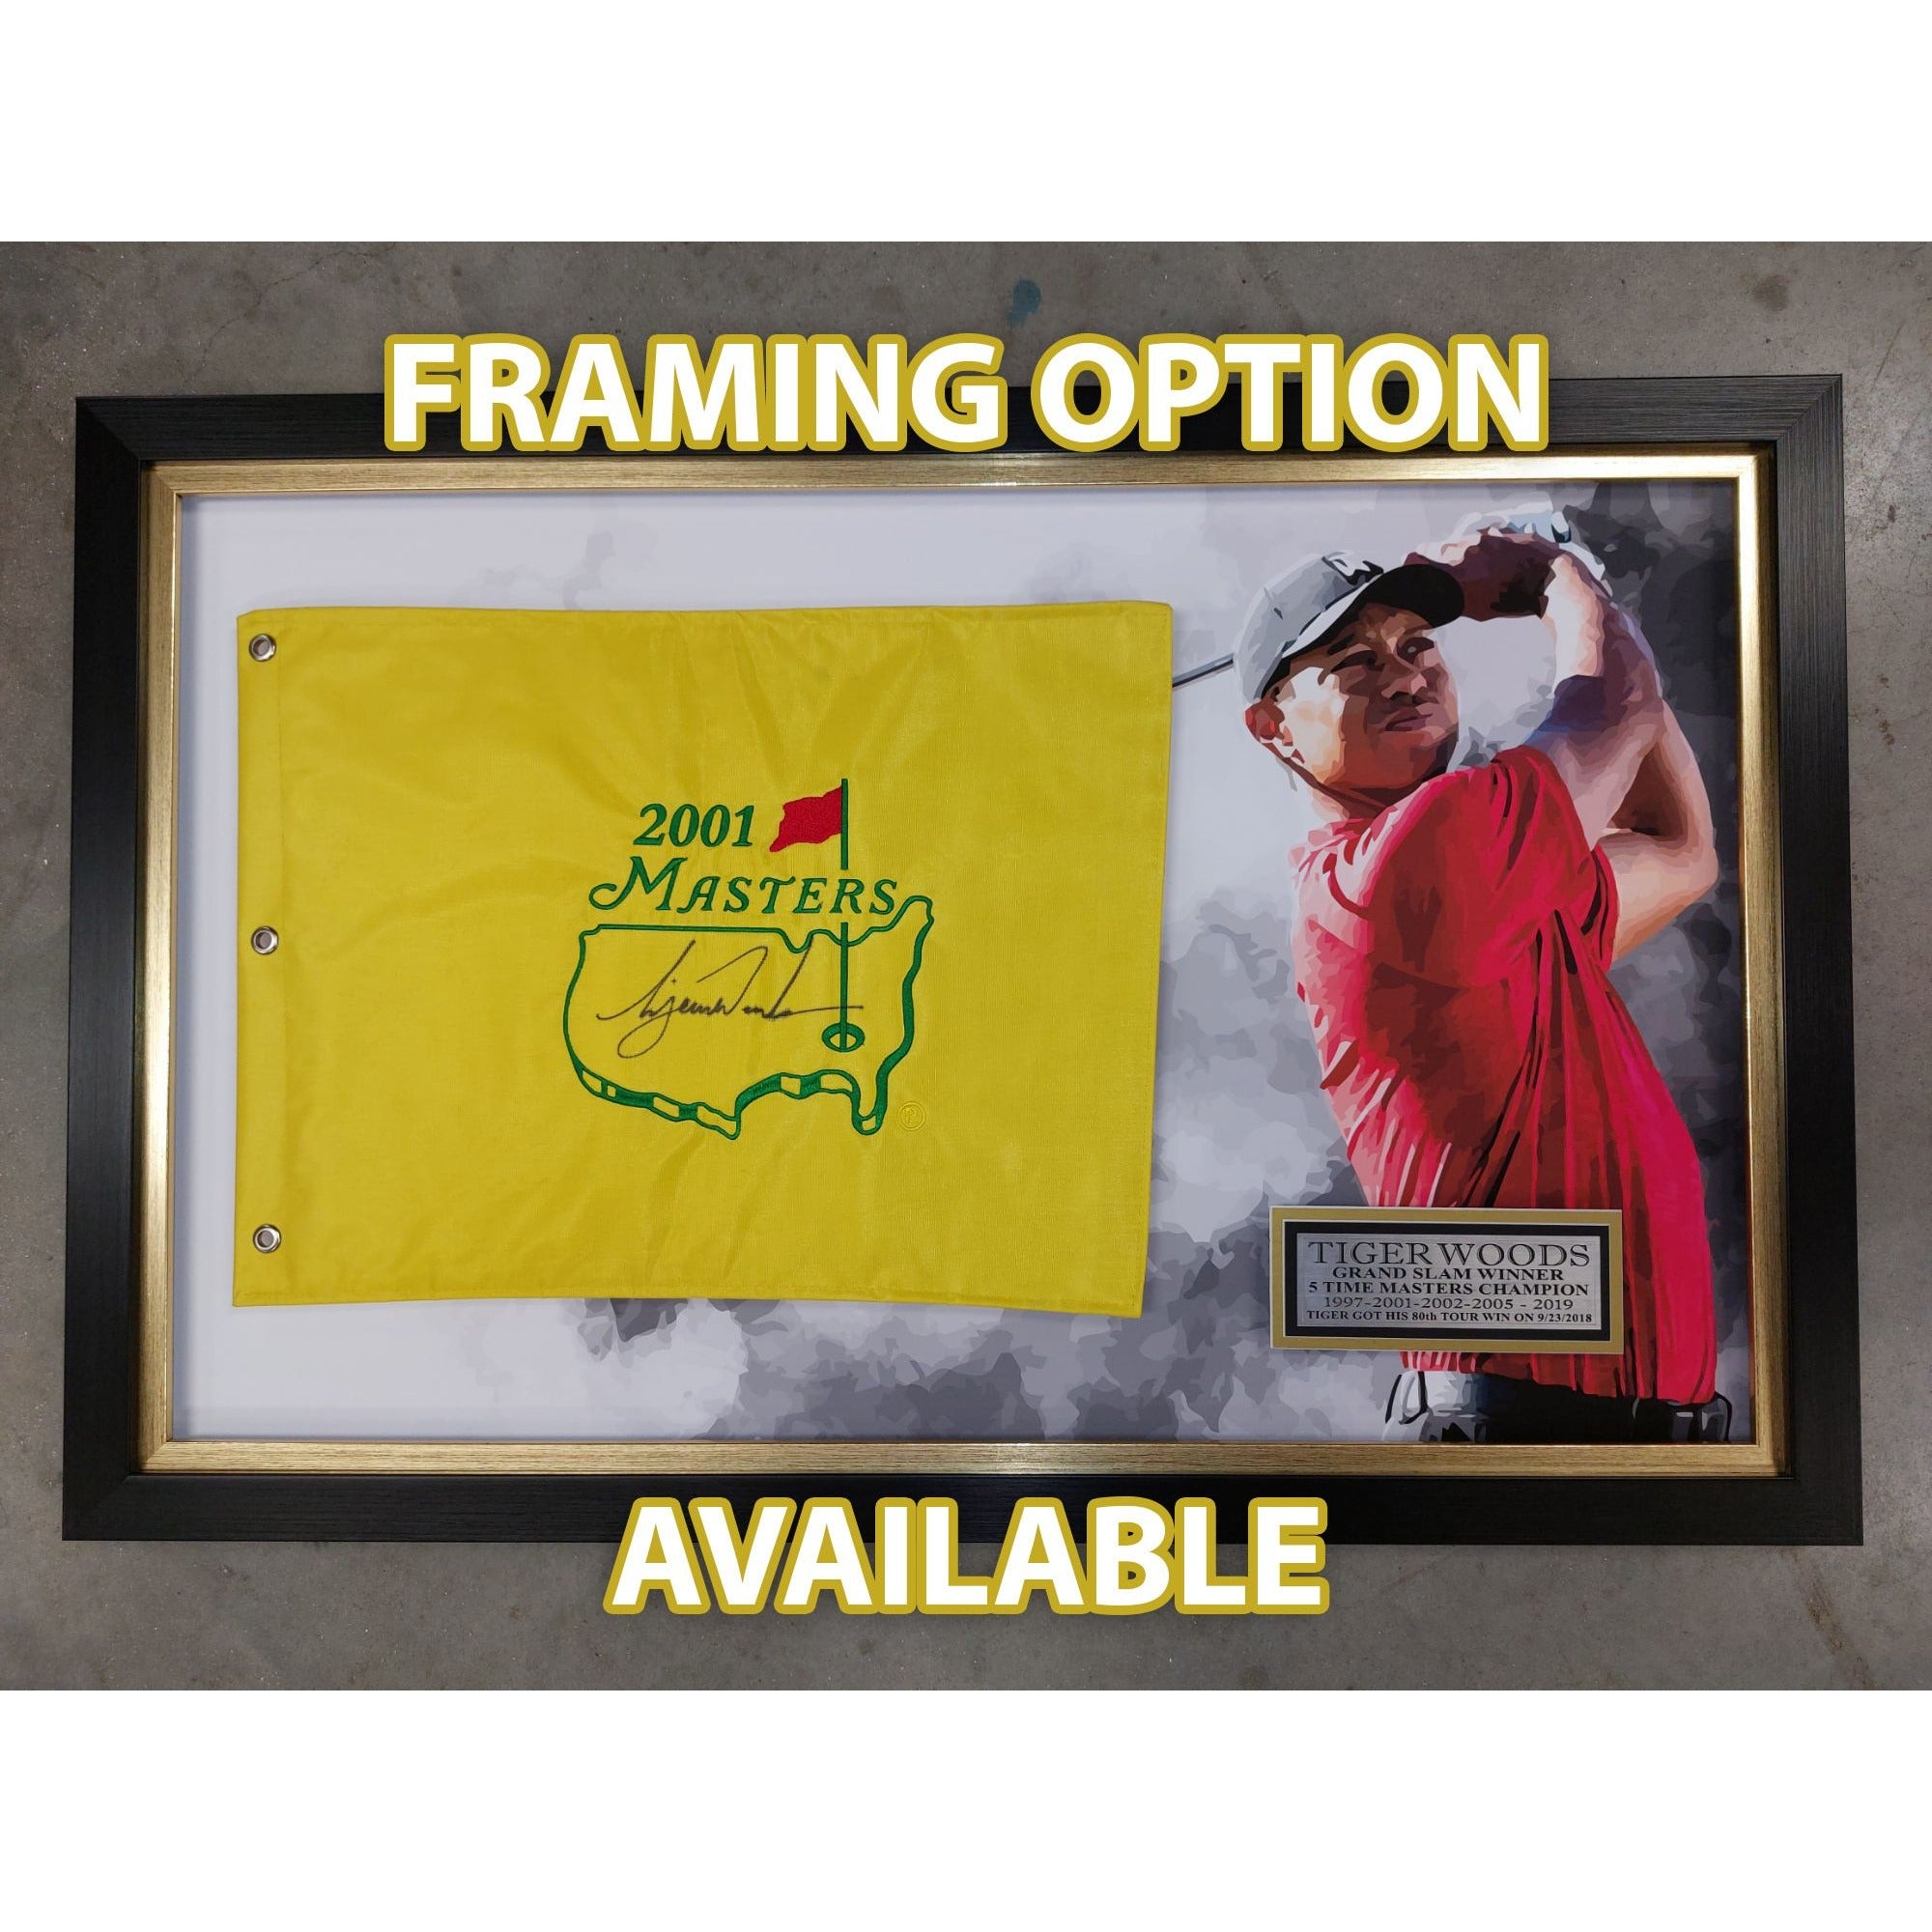 Tiger Woods "To Mike all the best" 2005 Masters Golf pin flag signed with proof